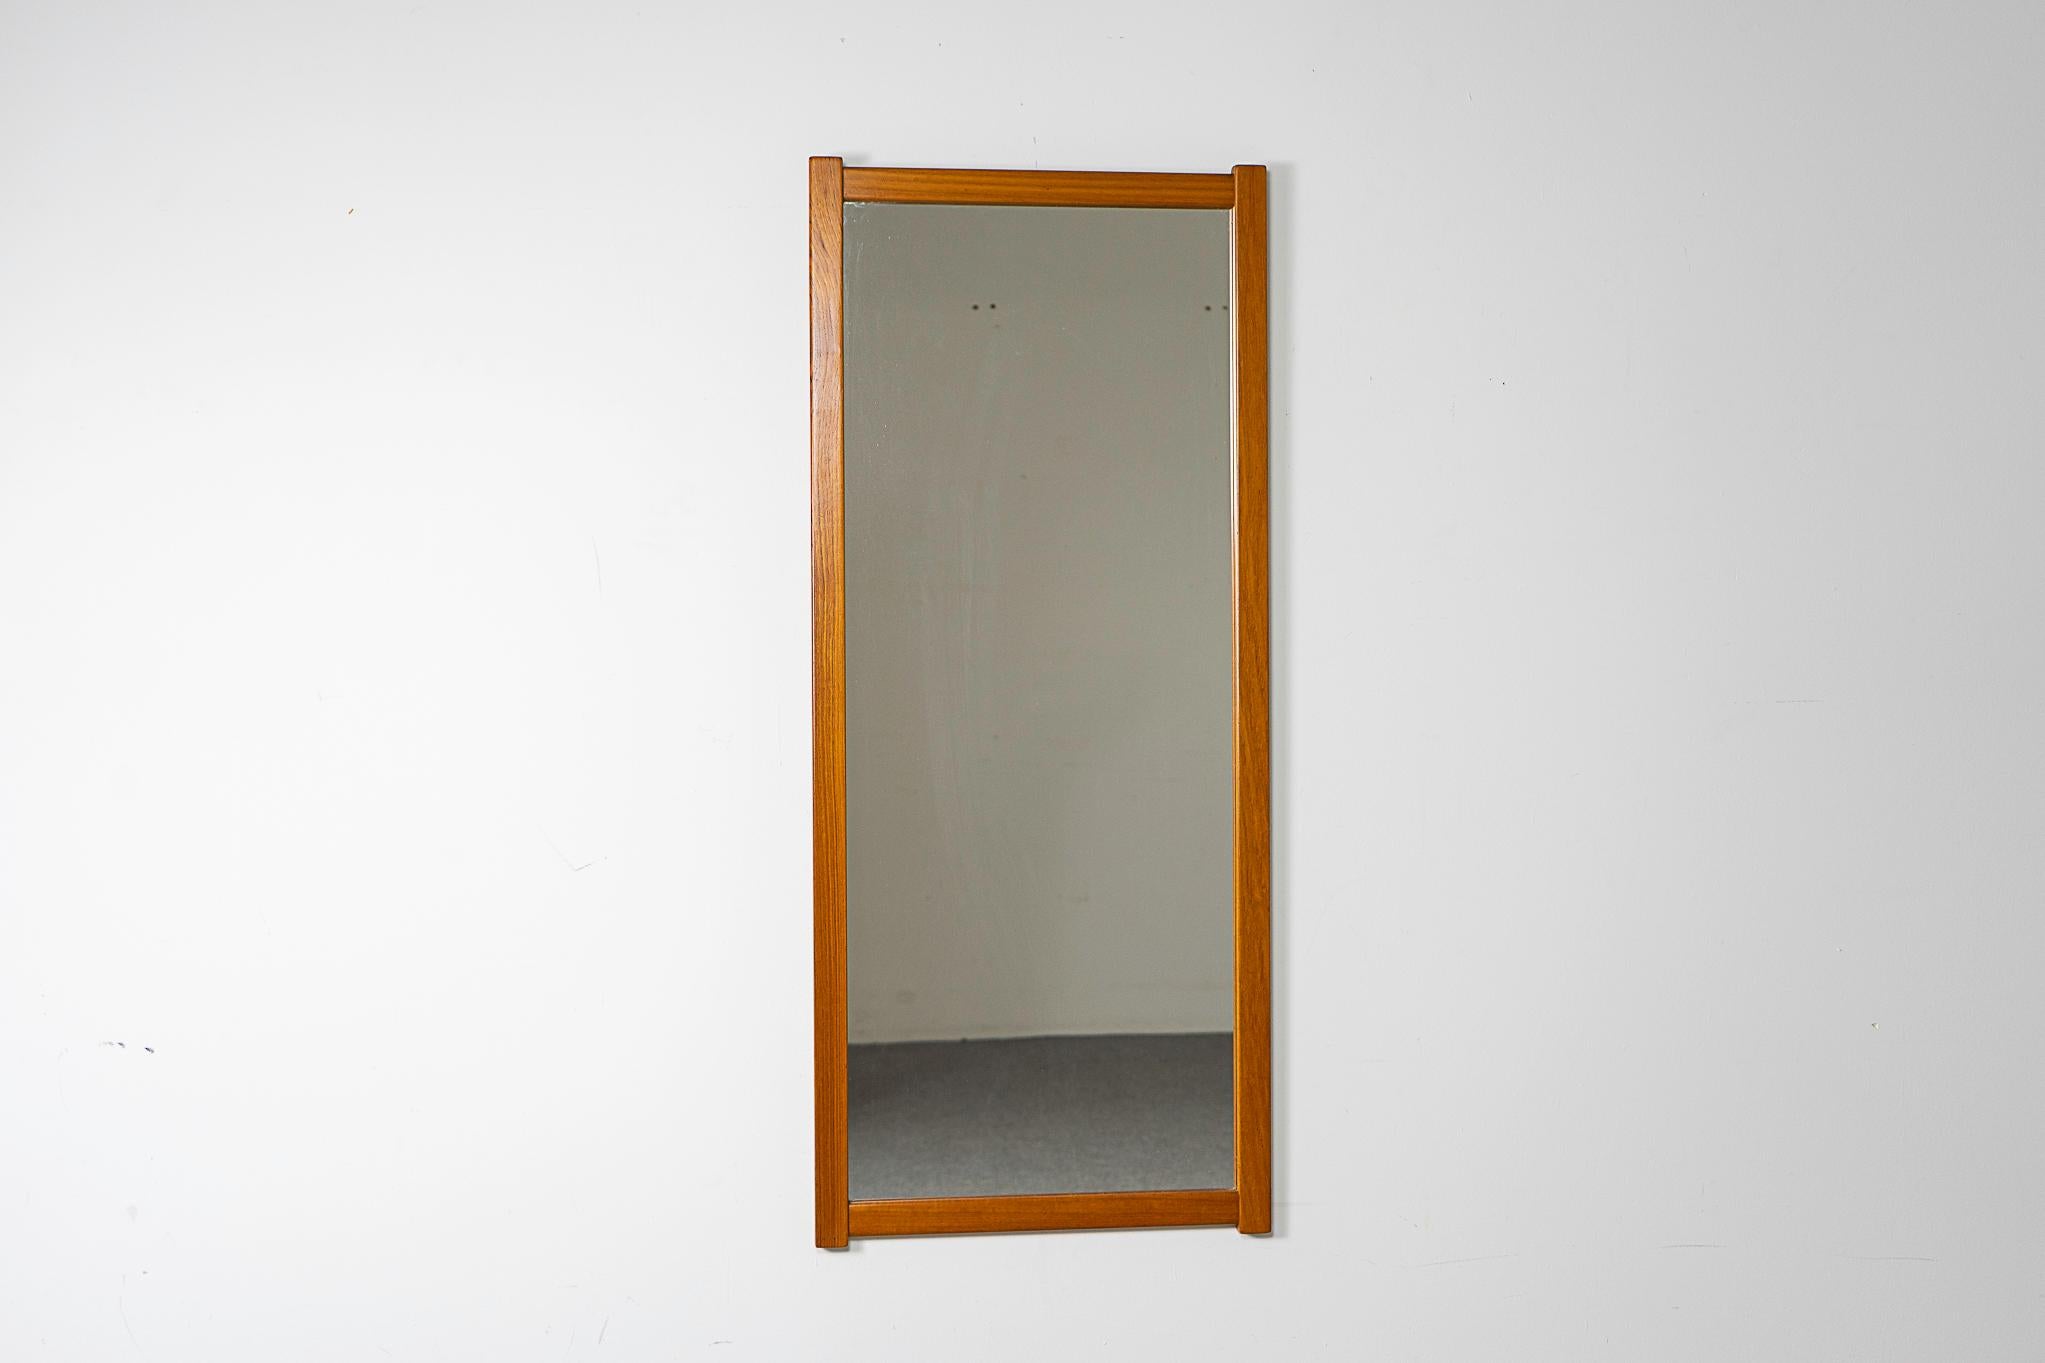 Teak mid-century mirror, circa 1960's. The perfect compliment to any interior especially in small apartments, condos and lofts where space can be tight.